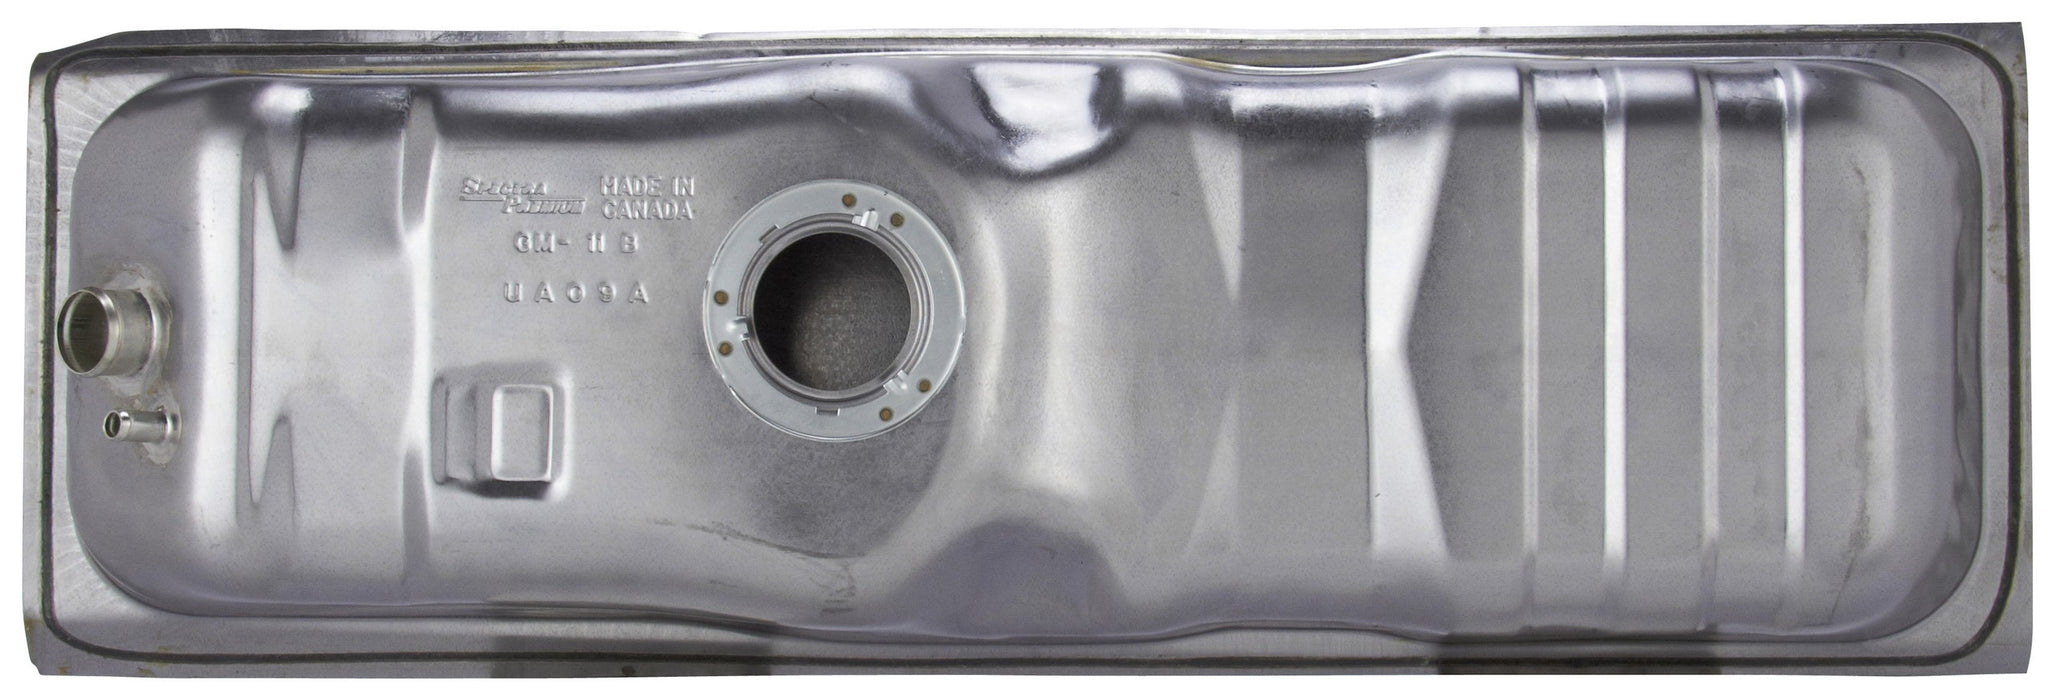 Fuel Tank for GMC R3500 1987 - Spectra GM11B